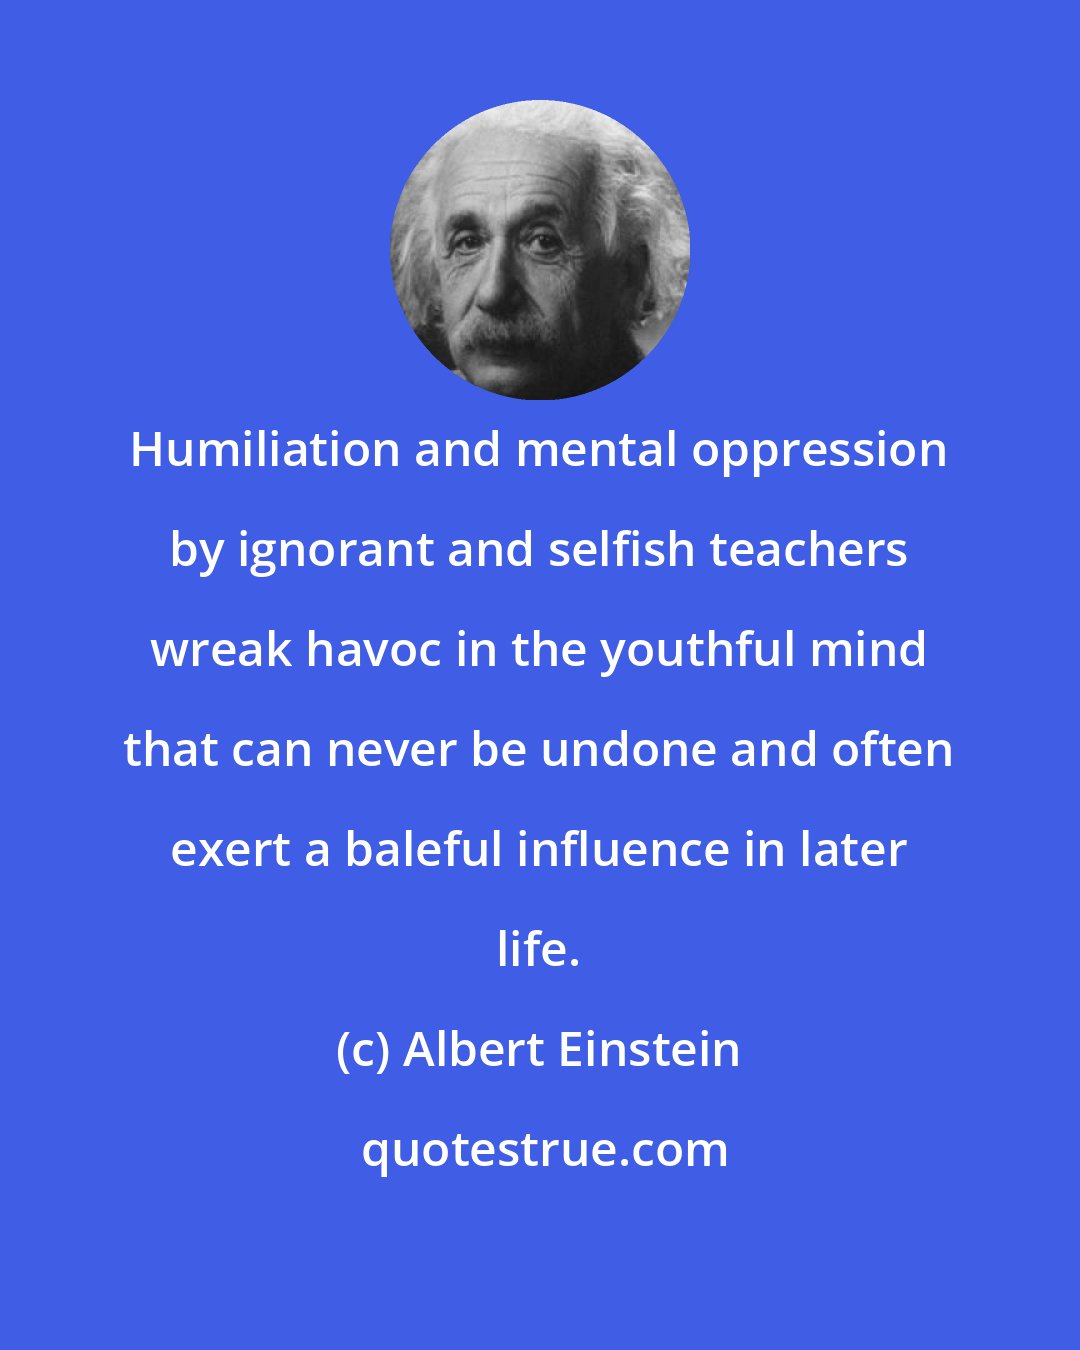 Albert Einstein: Humiliation and mental oppression by ignorant and selfish teachers wreak havoc in the youthful mind that can never be undone and often exert a baleful influence in later life.